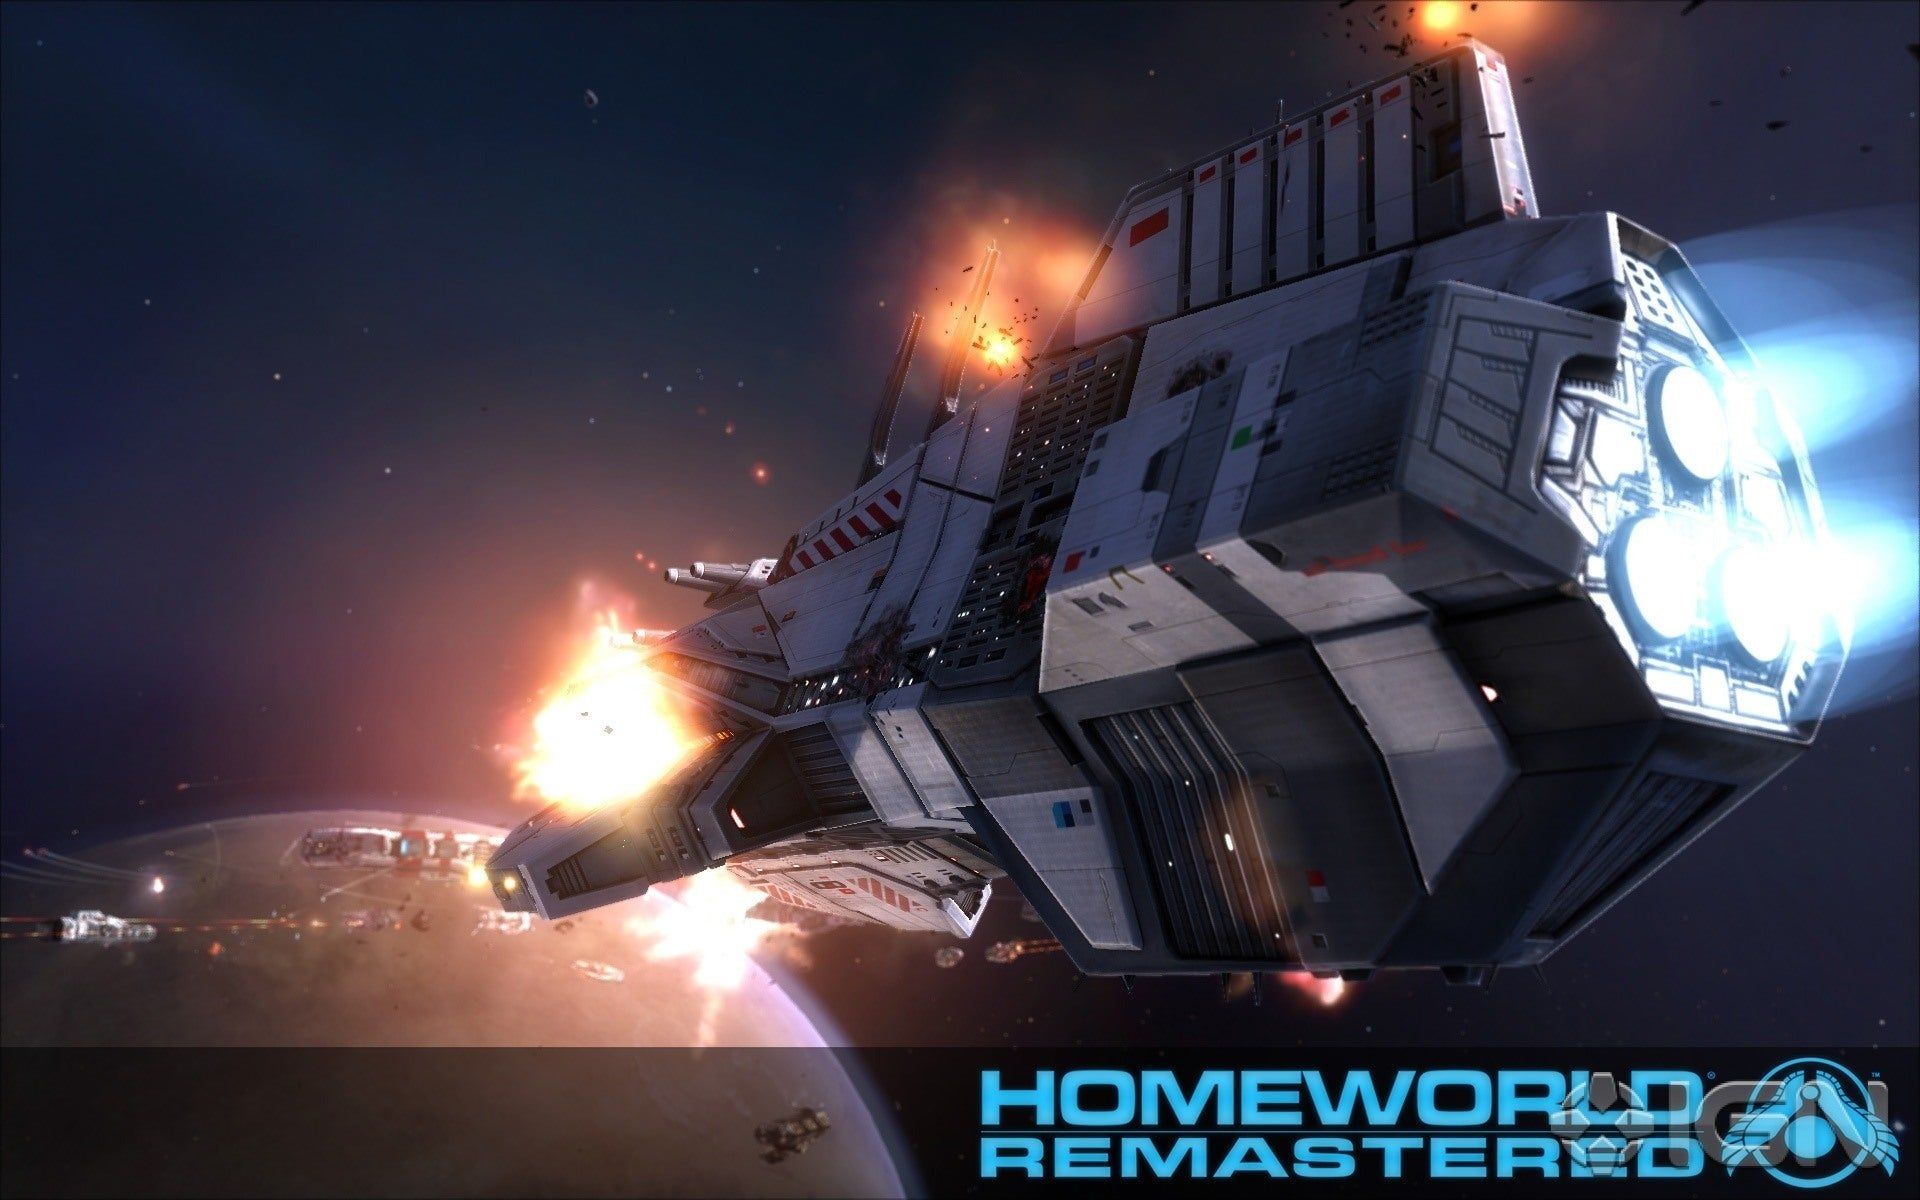 Homeworld Remastered Collection Screenshots, Picture, Wallpaper